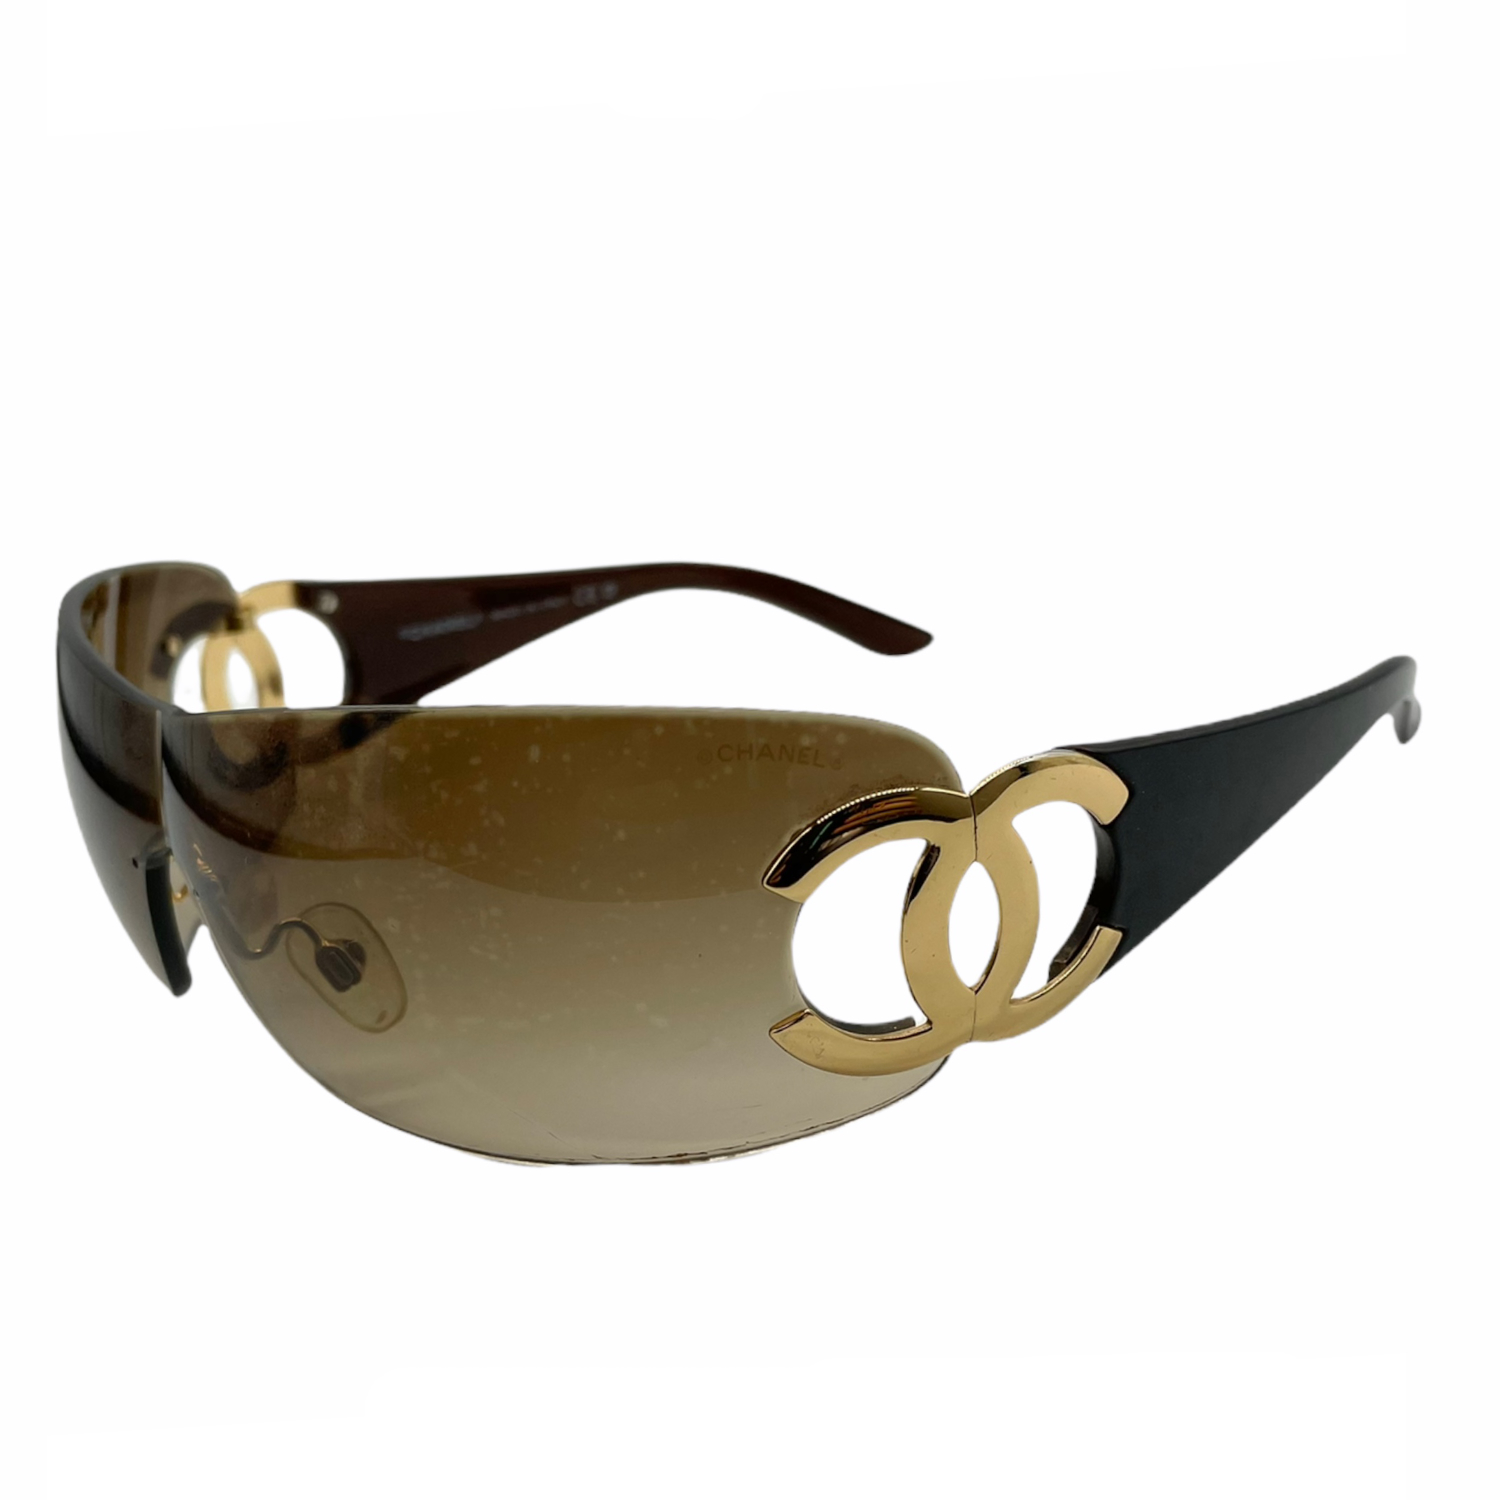 Chanel Rimless Visor Sunglasses in Brown and Gold